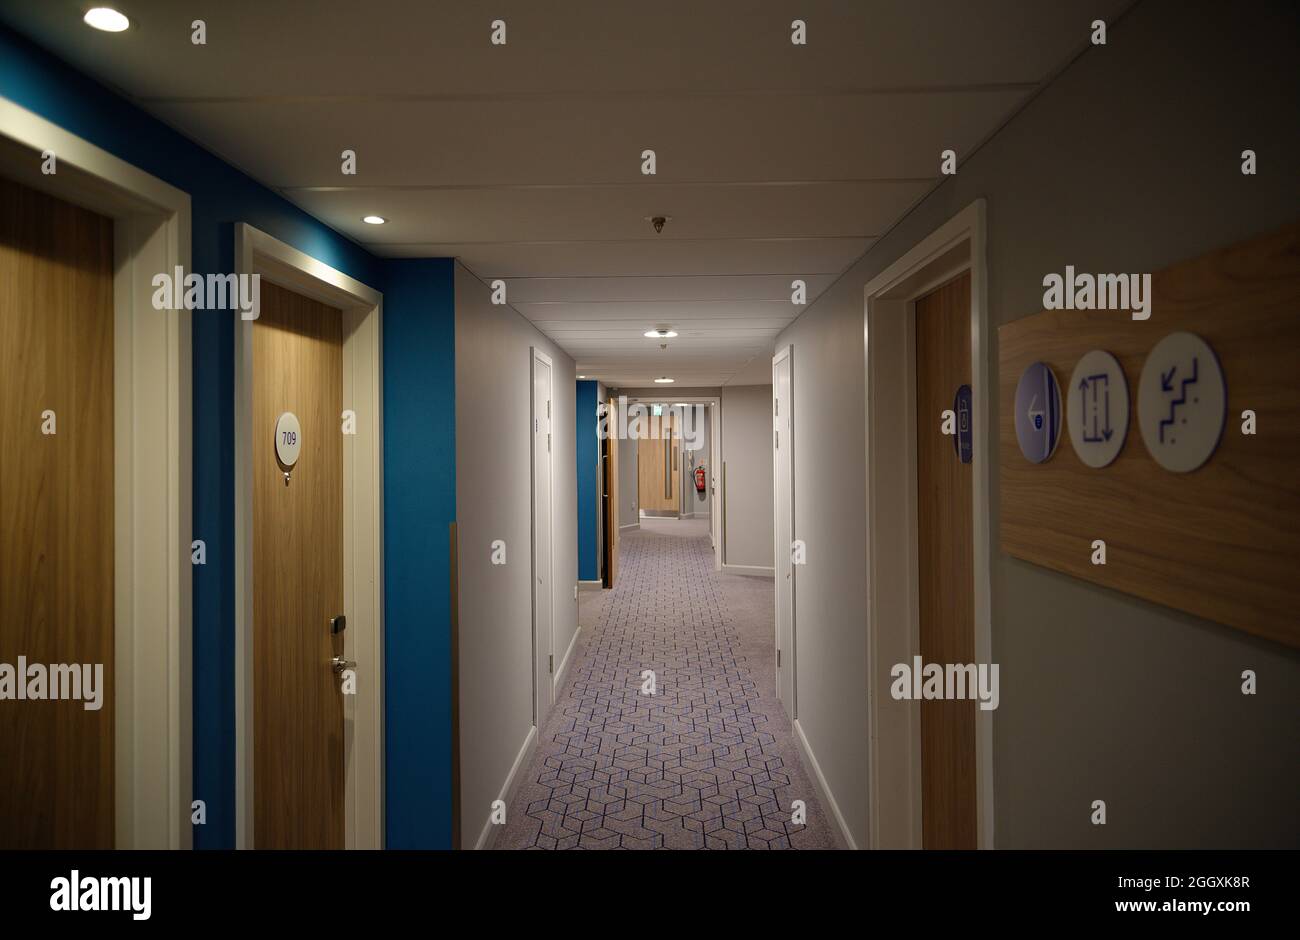 A dimly lit hotel corridor with plain walls and a patterned carpet. Stock Photo